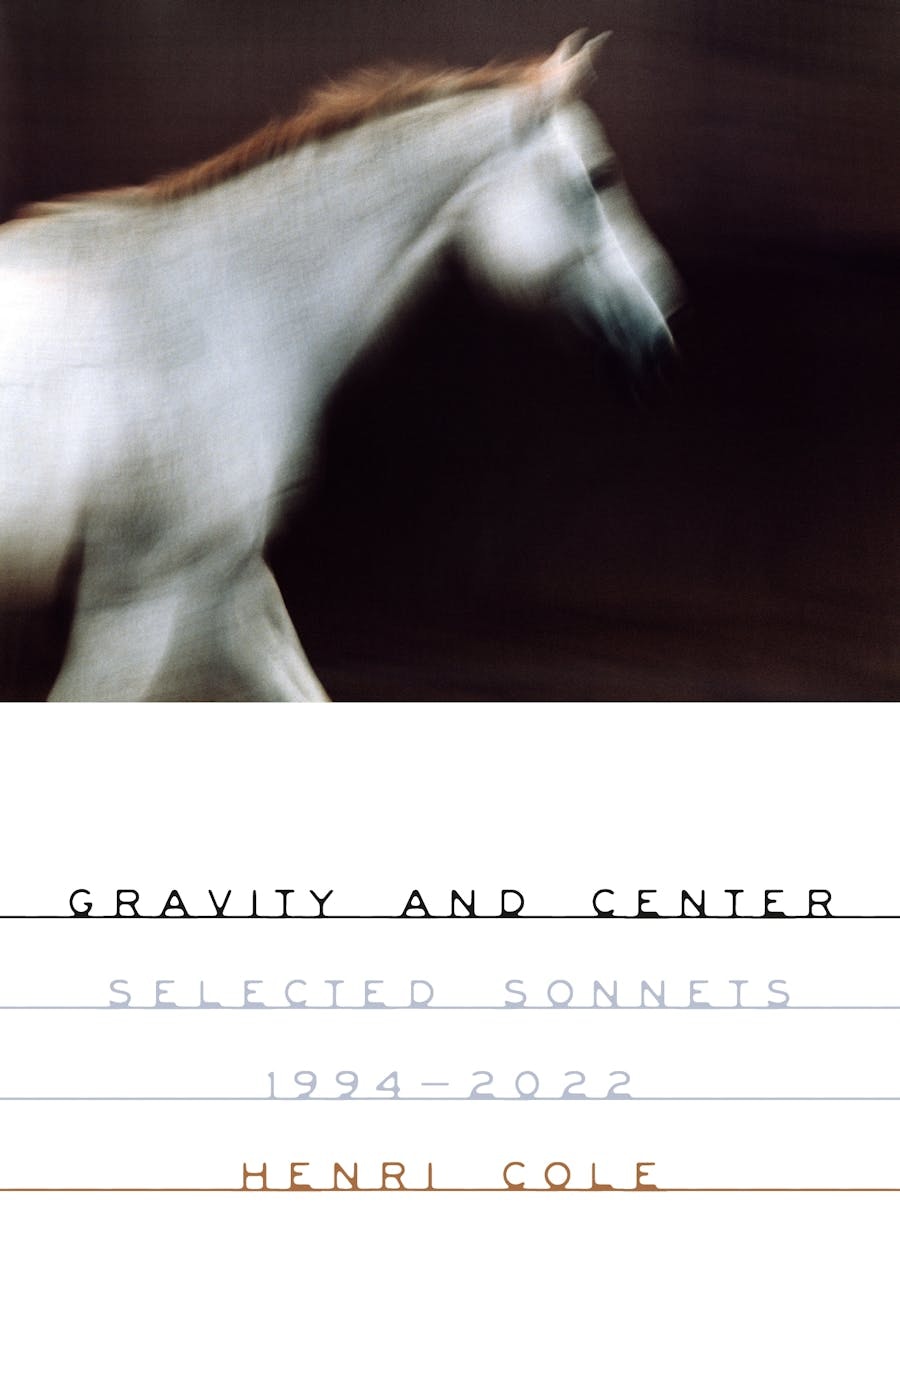 The cover of Cole's Gravity and Center shows a photo of a white horse mid-stride